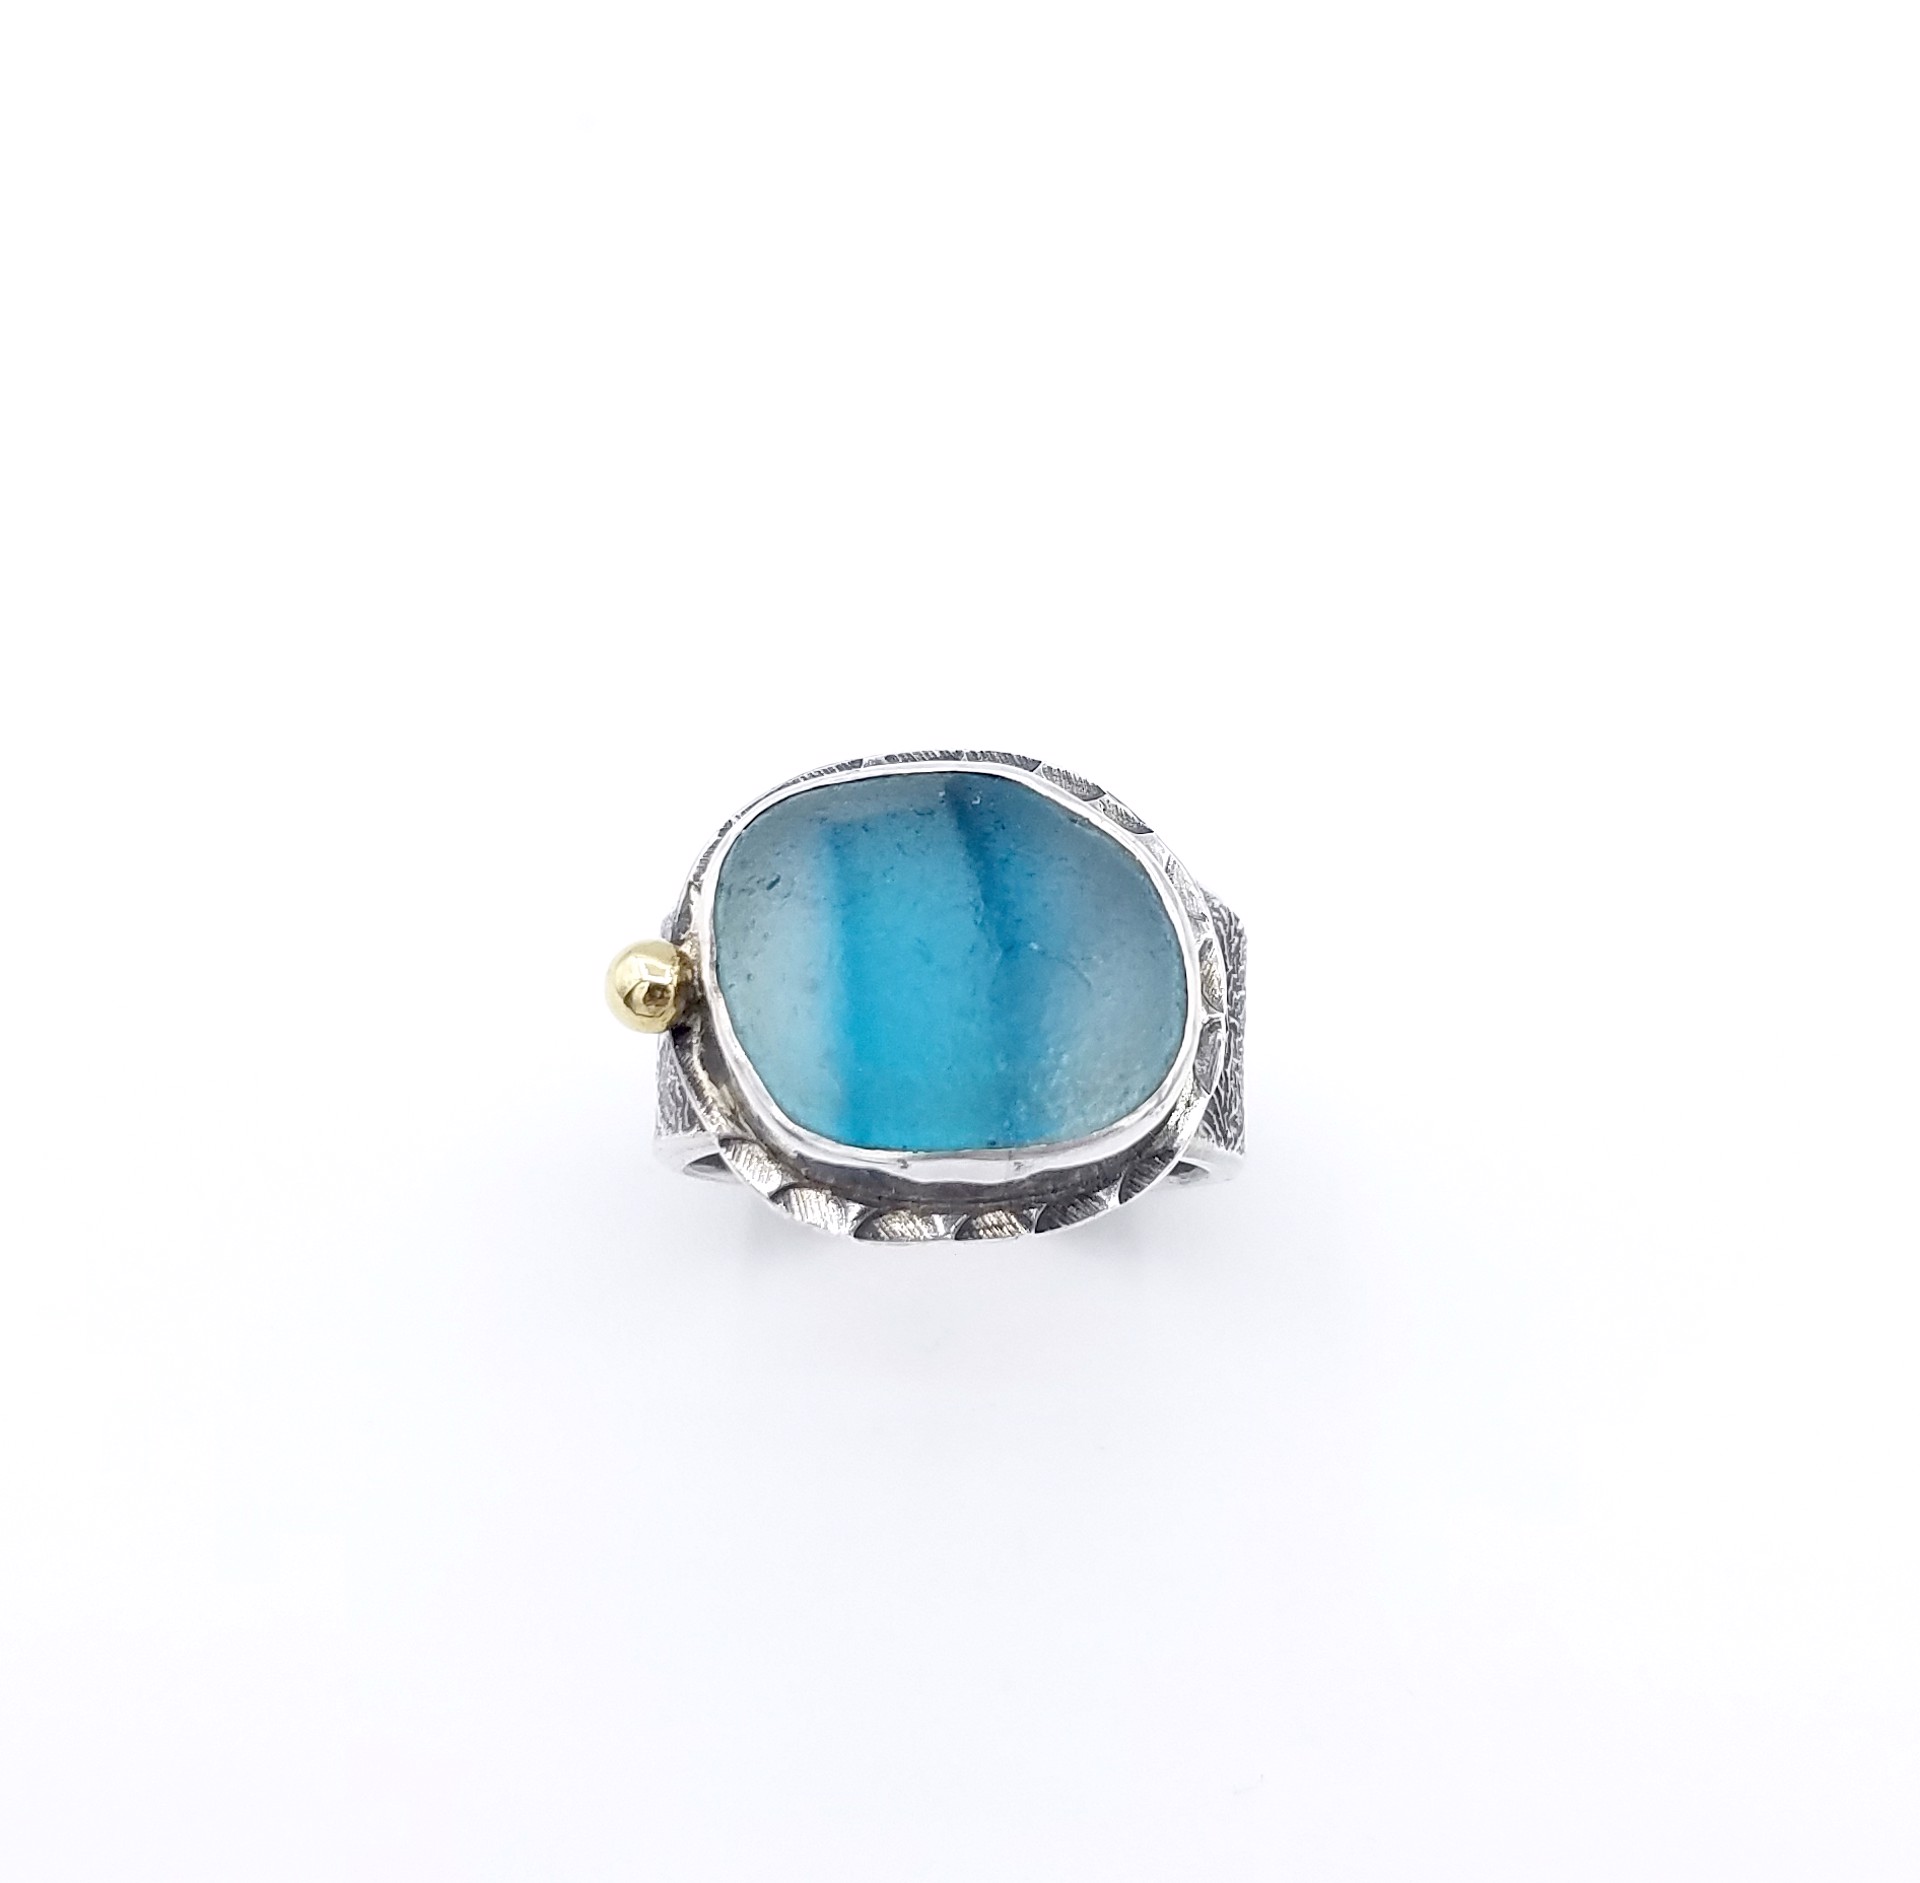 Blue Stripe Seaglass Ring with Gold Dot by Judith Altruda